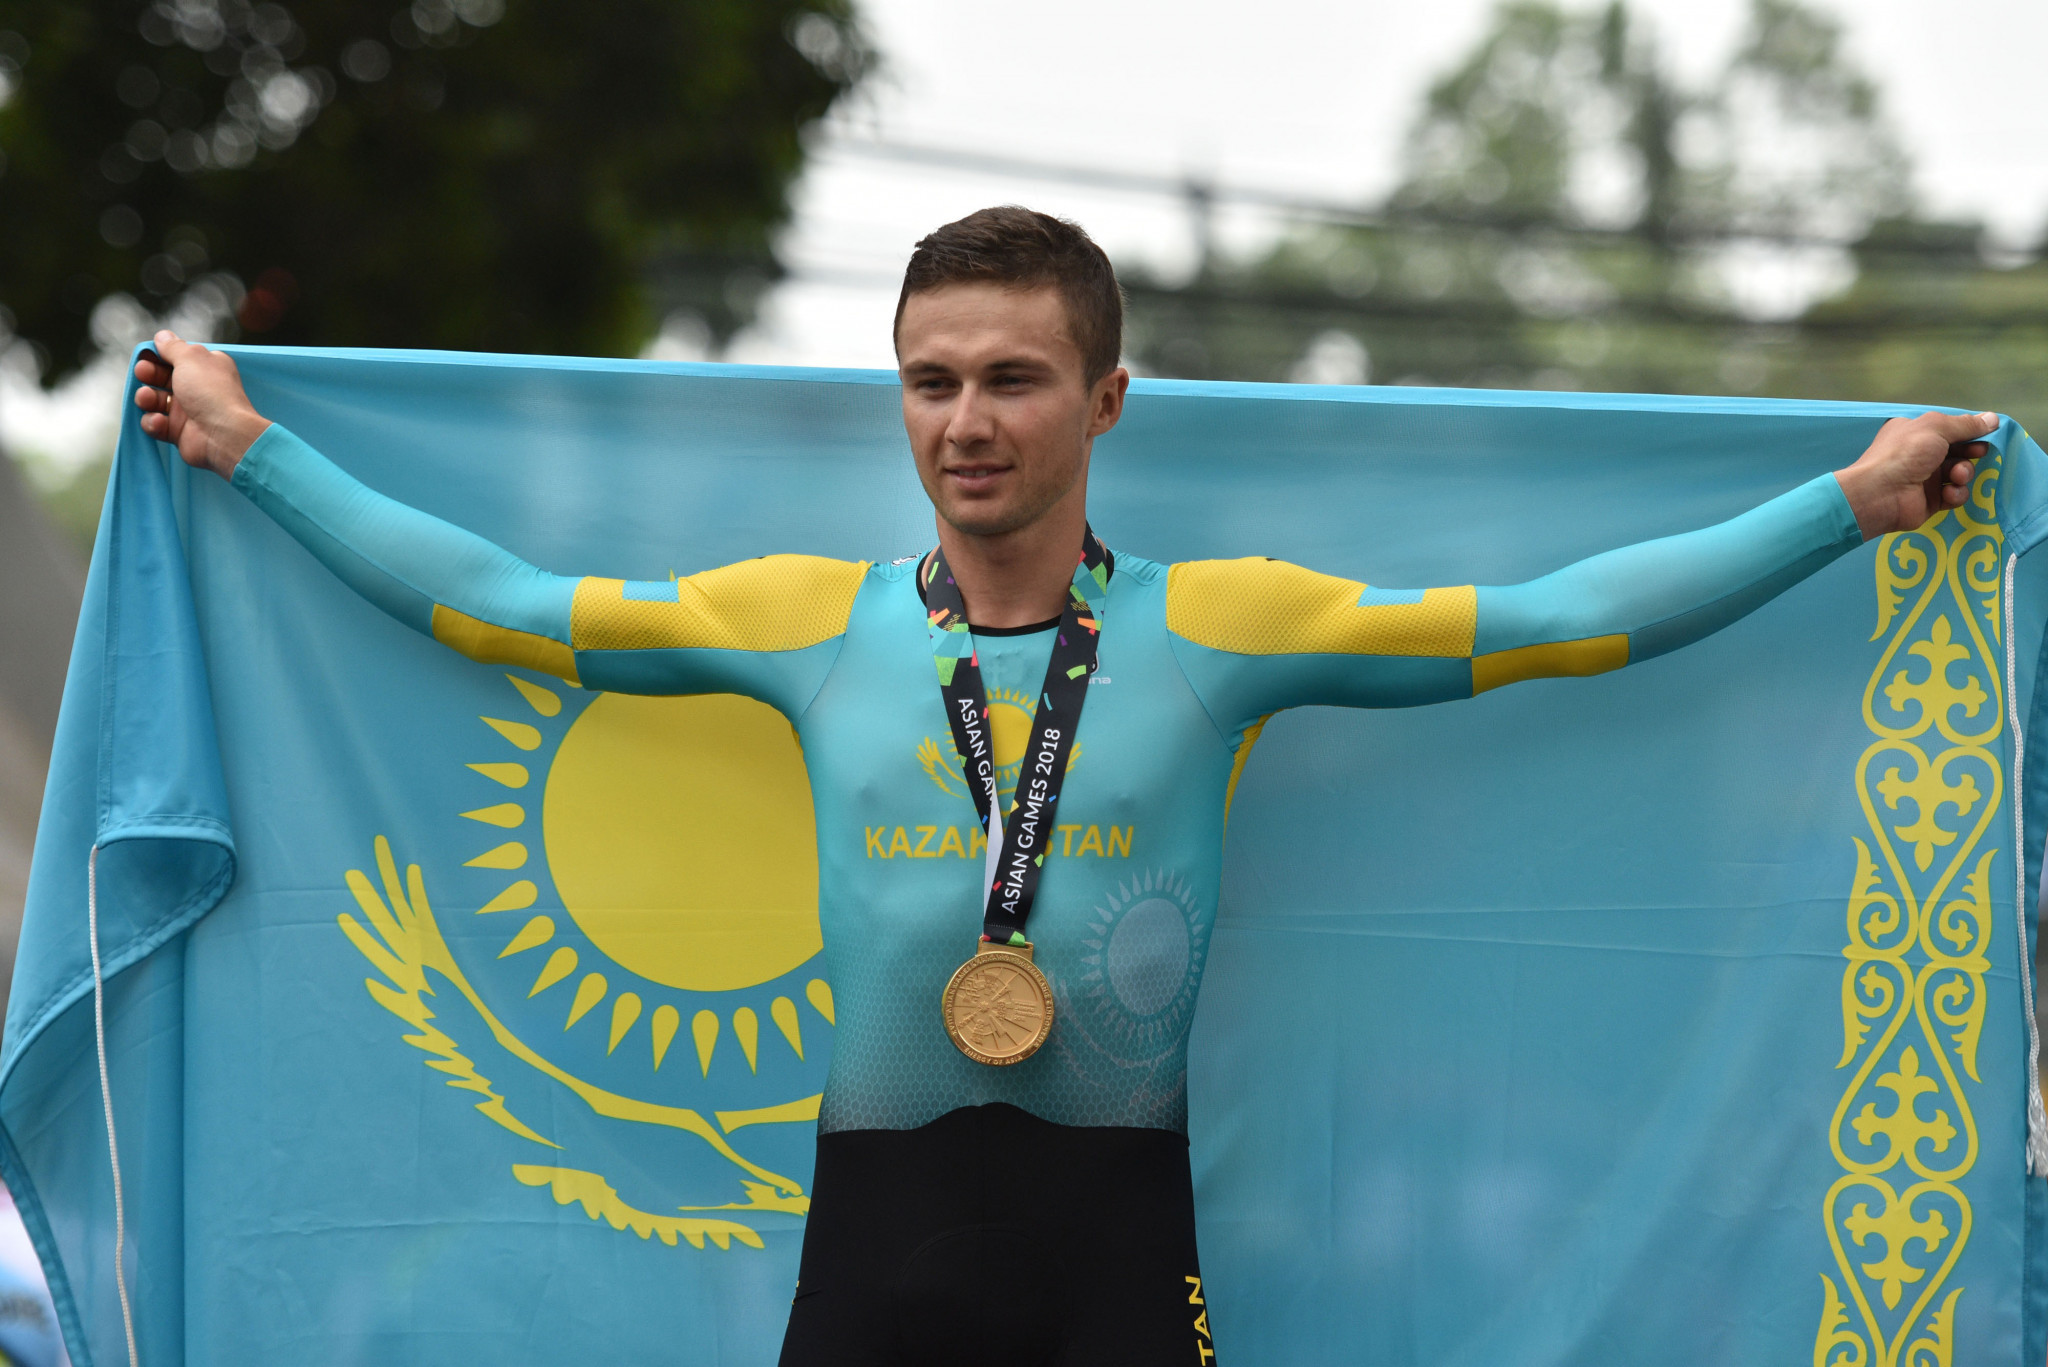 Kazakhstan's Alexey Lutsenko joined South Korea's Na Ahreum as the only cyclists to win both the road race and the individual time trial at a single Asian Games on day six of Jakarta Palembang 2018 ©Getty Images